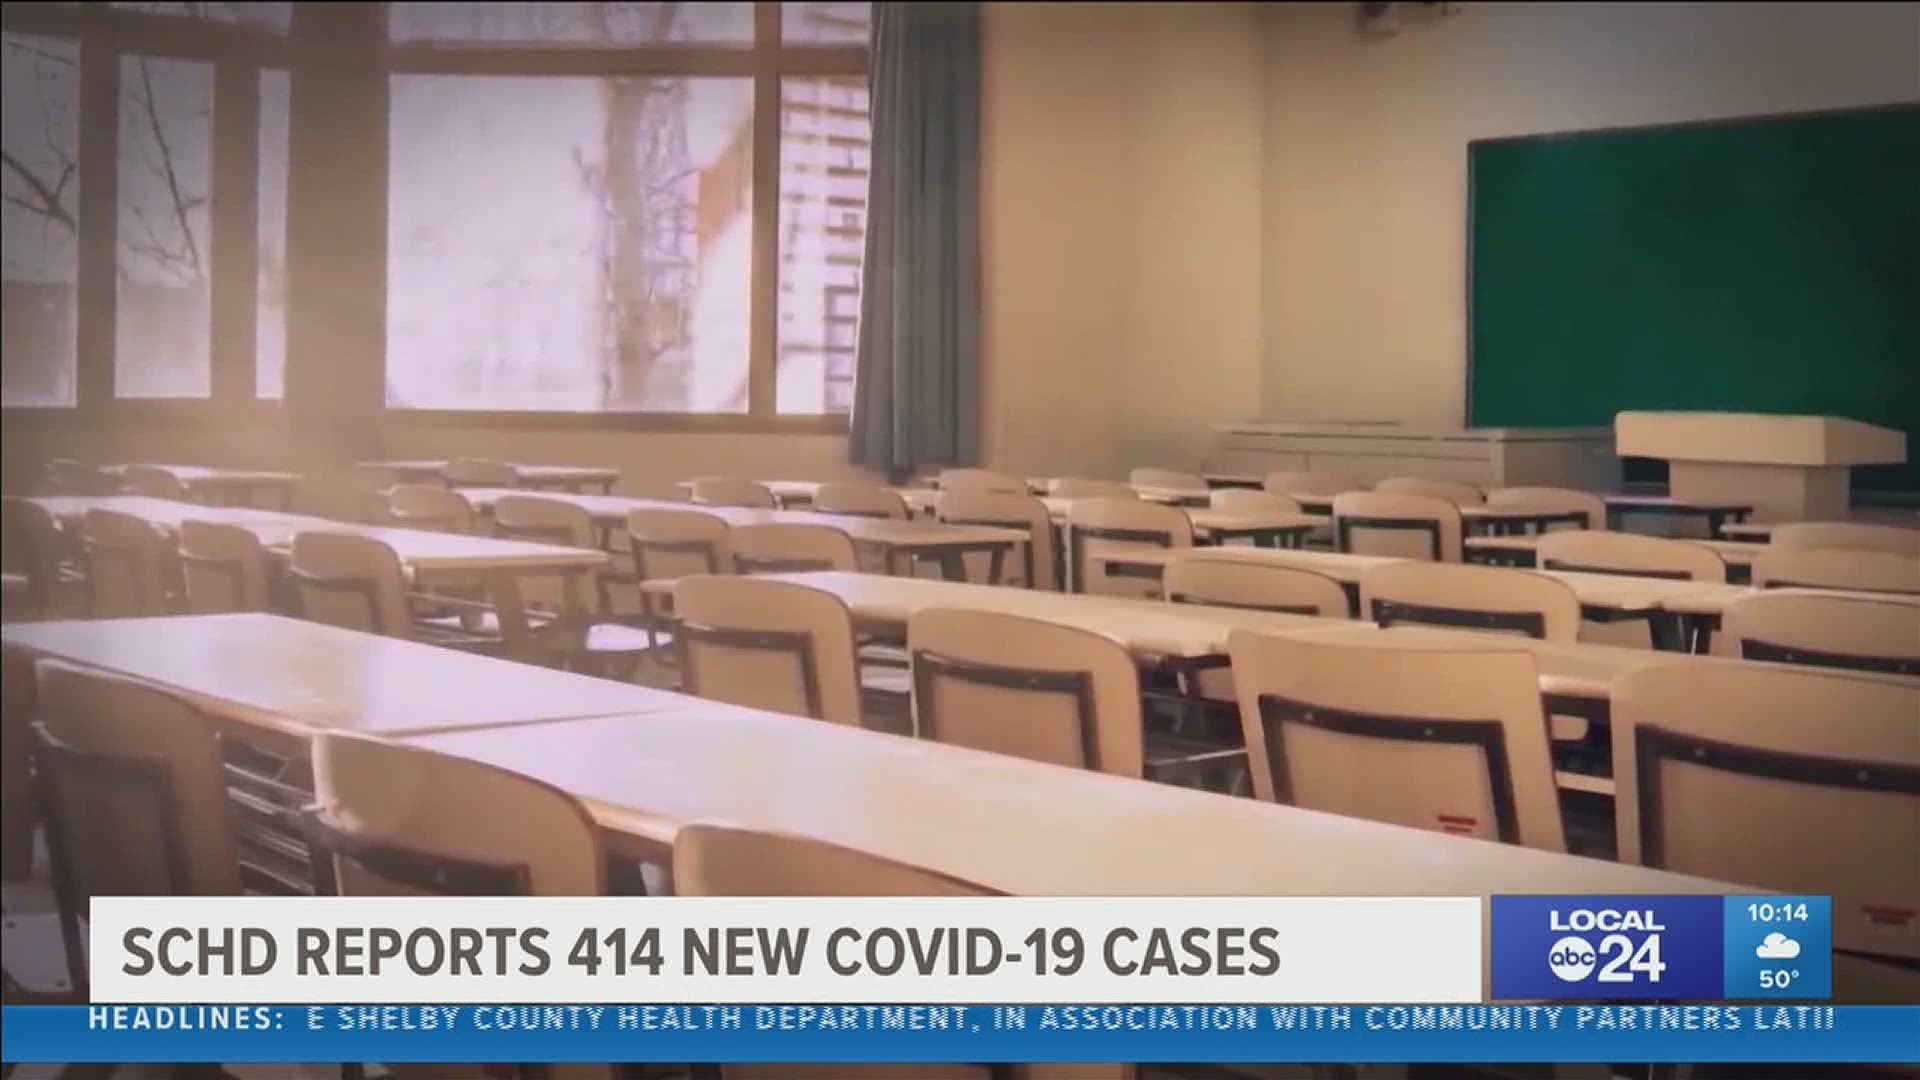 Local 24 News Reporter Caitlin McCarthy speaks with a parent on the concerns of letting their child return to school despite the COVID-19 concerns